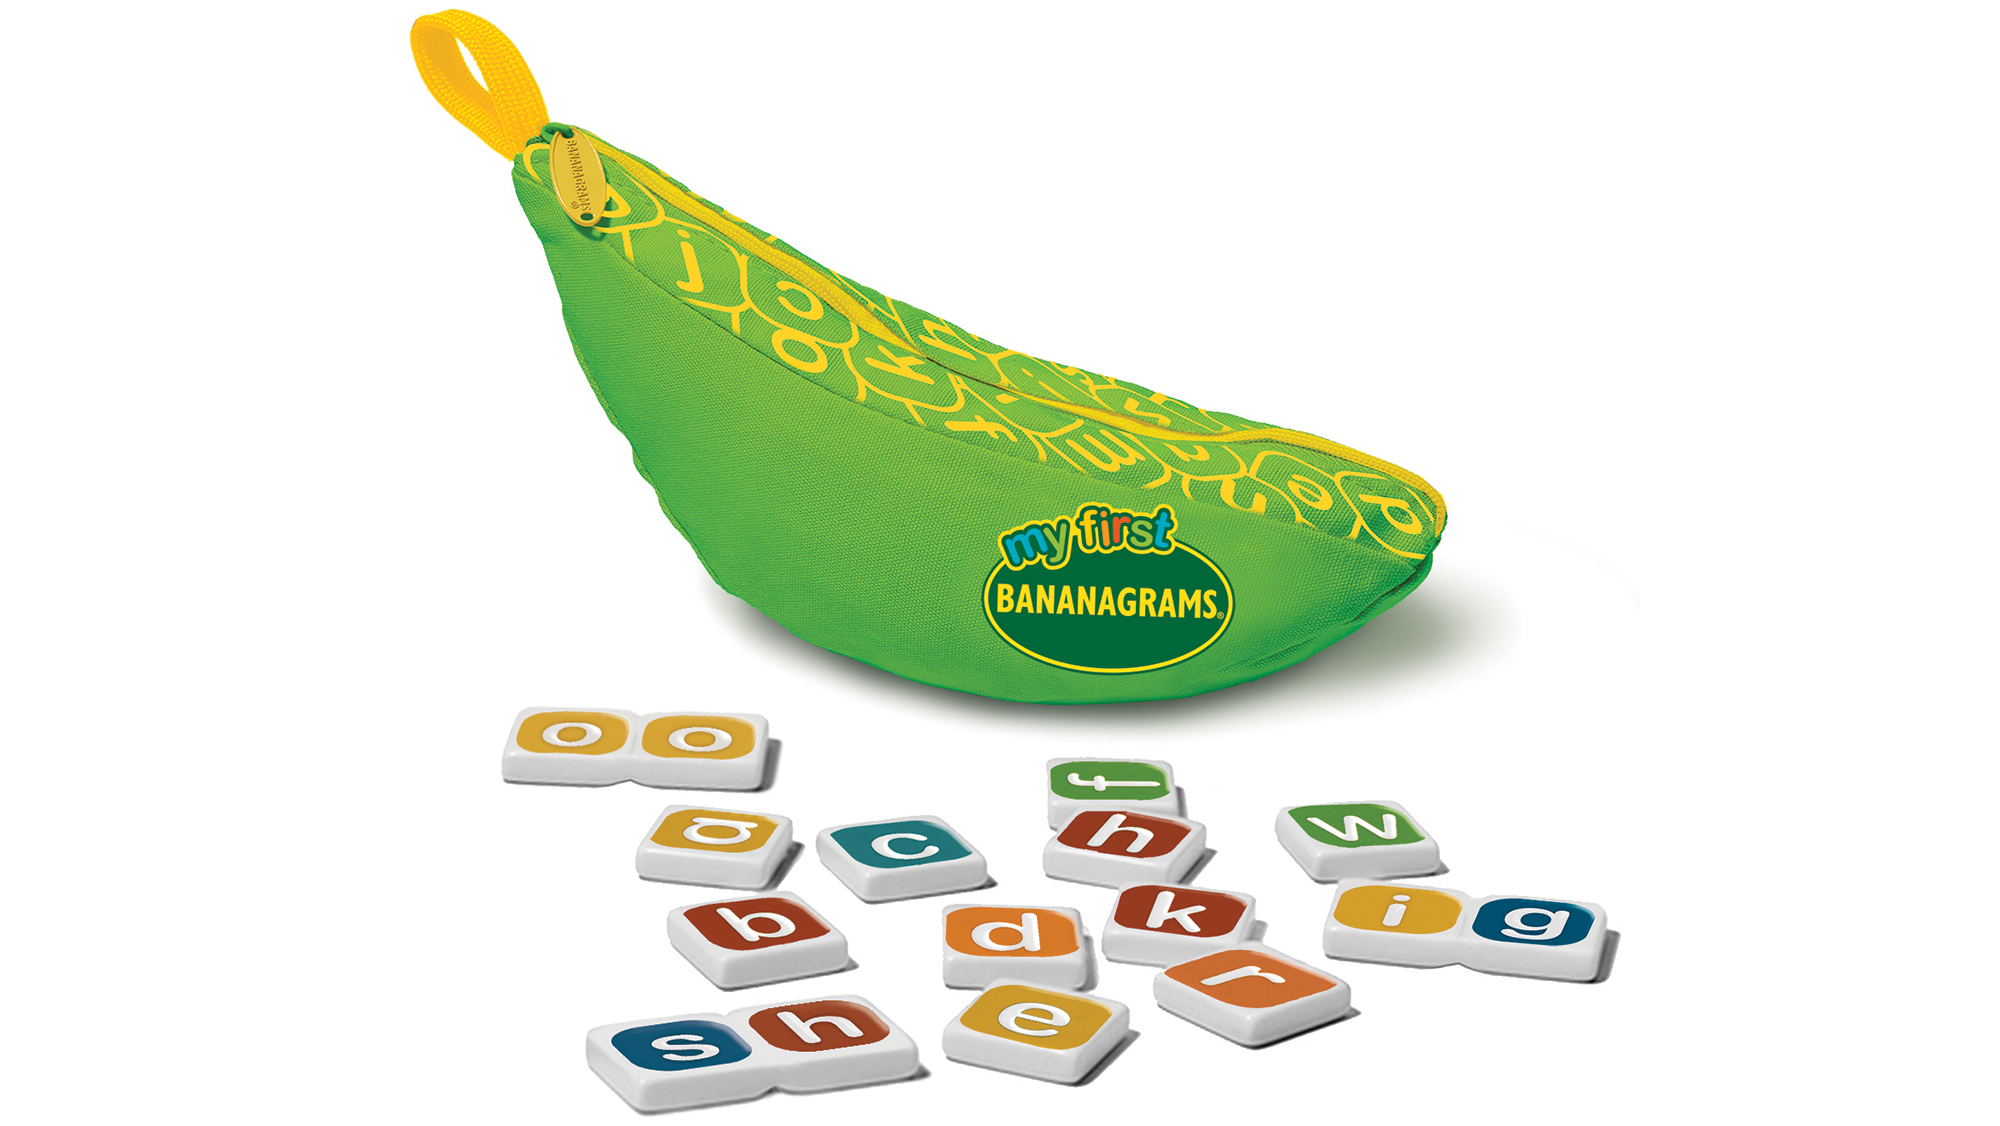 The New Version Of Bananagrams Encourages Players To Sabotage Each Other